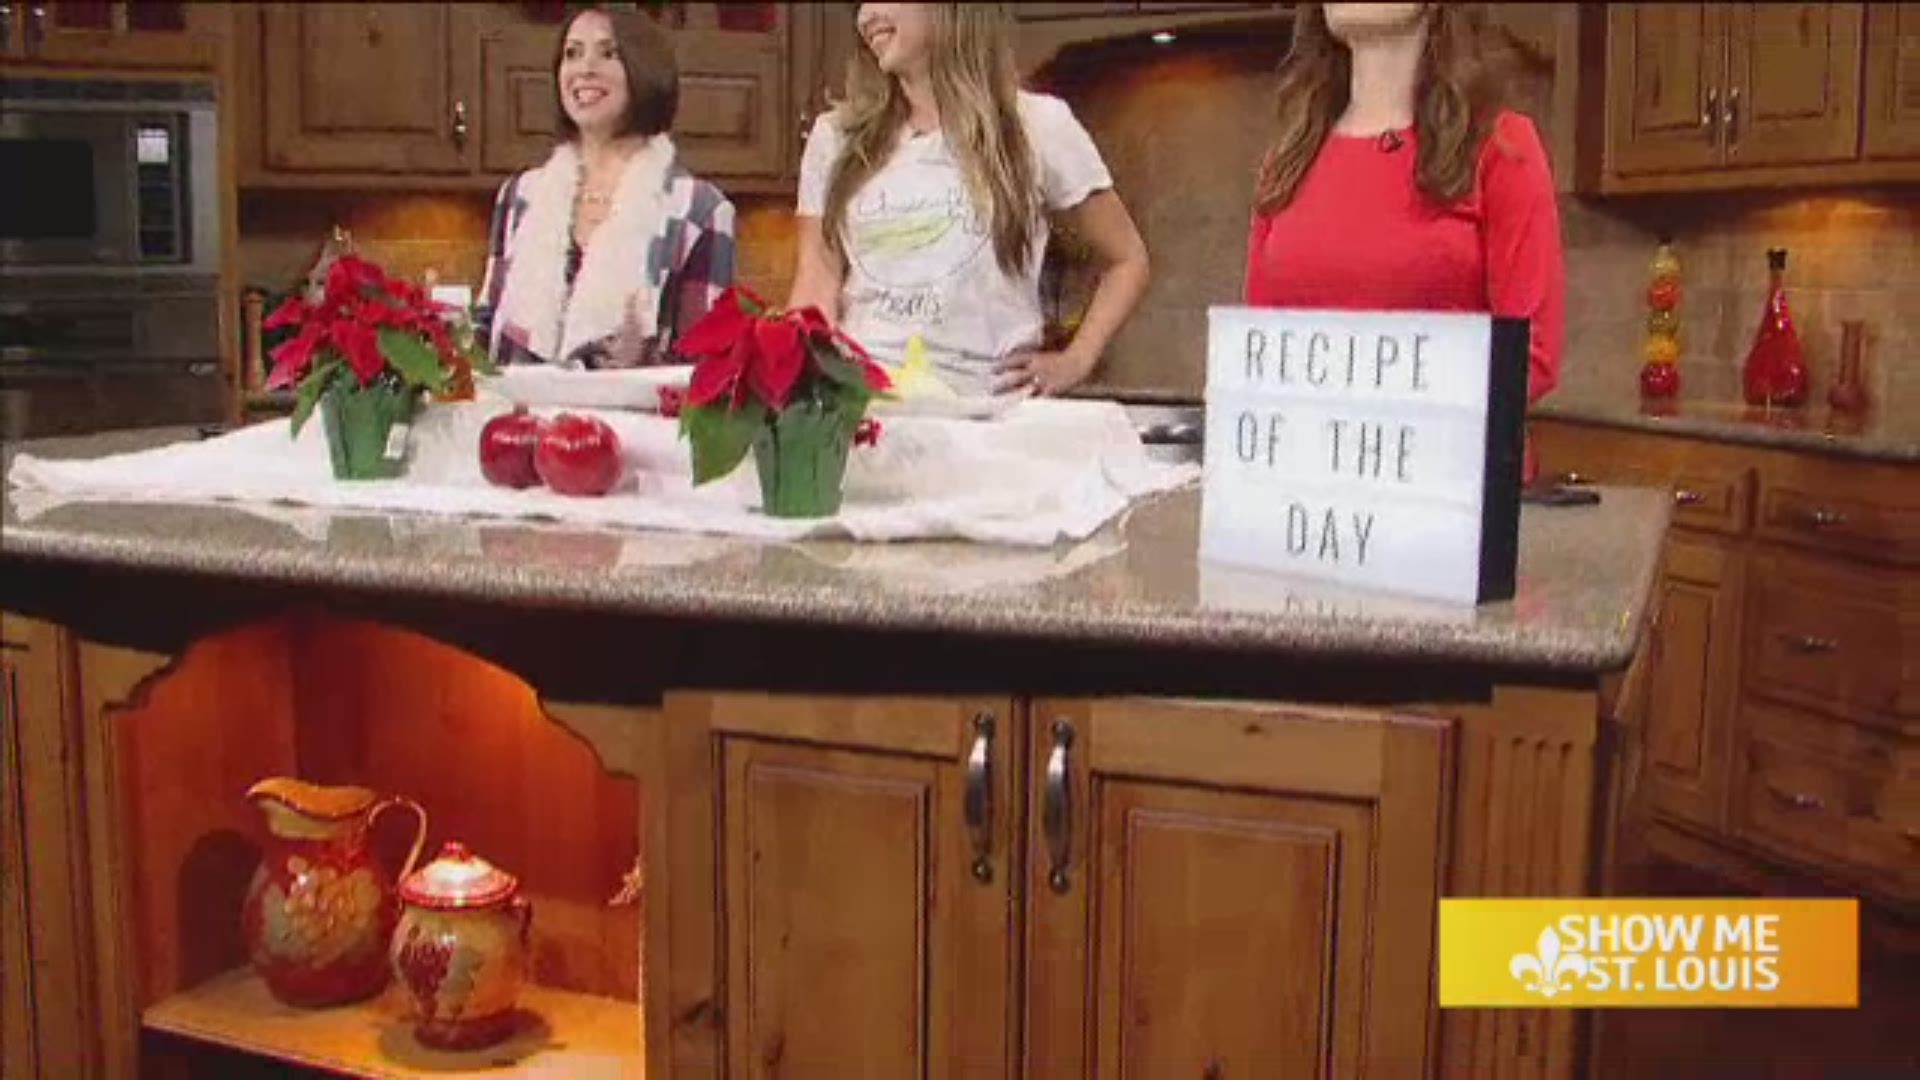 Hayley Sohn of Basically It Meals shared a recipe for a fun holiday appetizer.